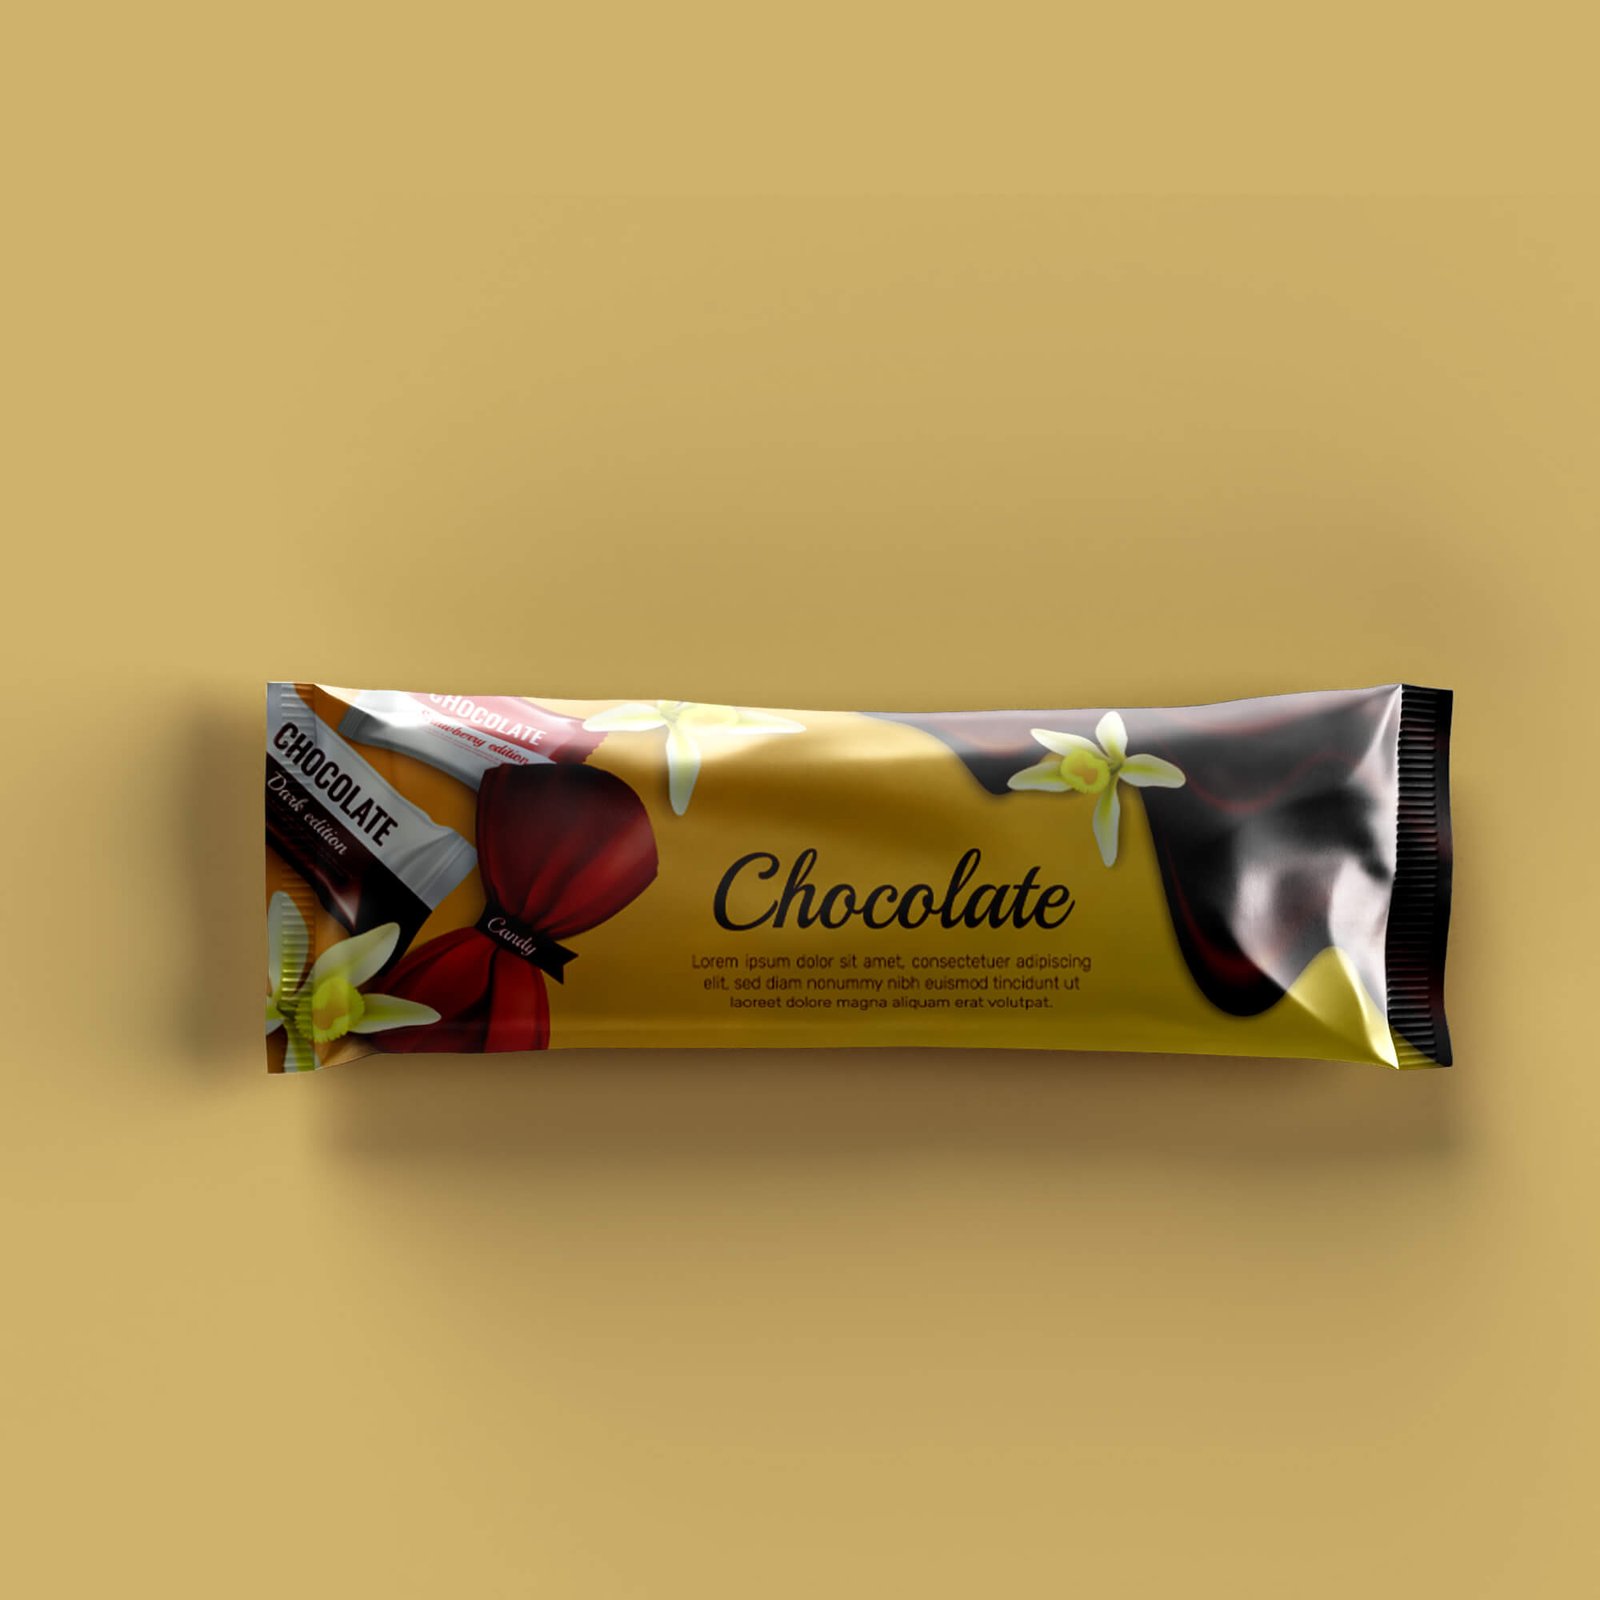 Design Free Chocolate Packaging Mockup PSD Template